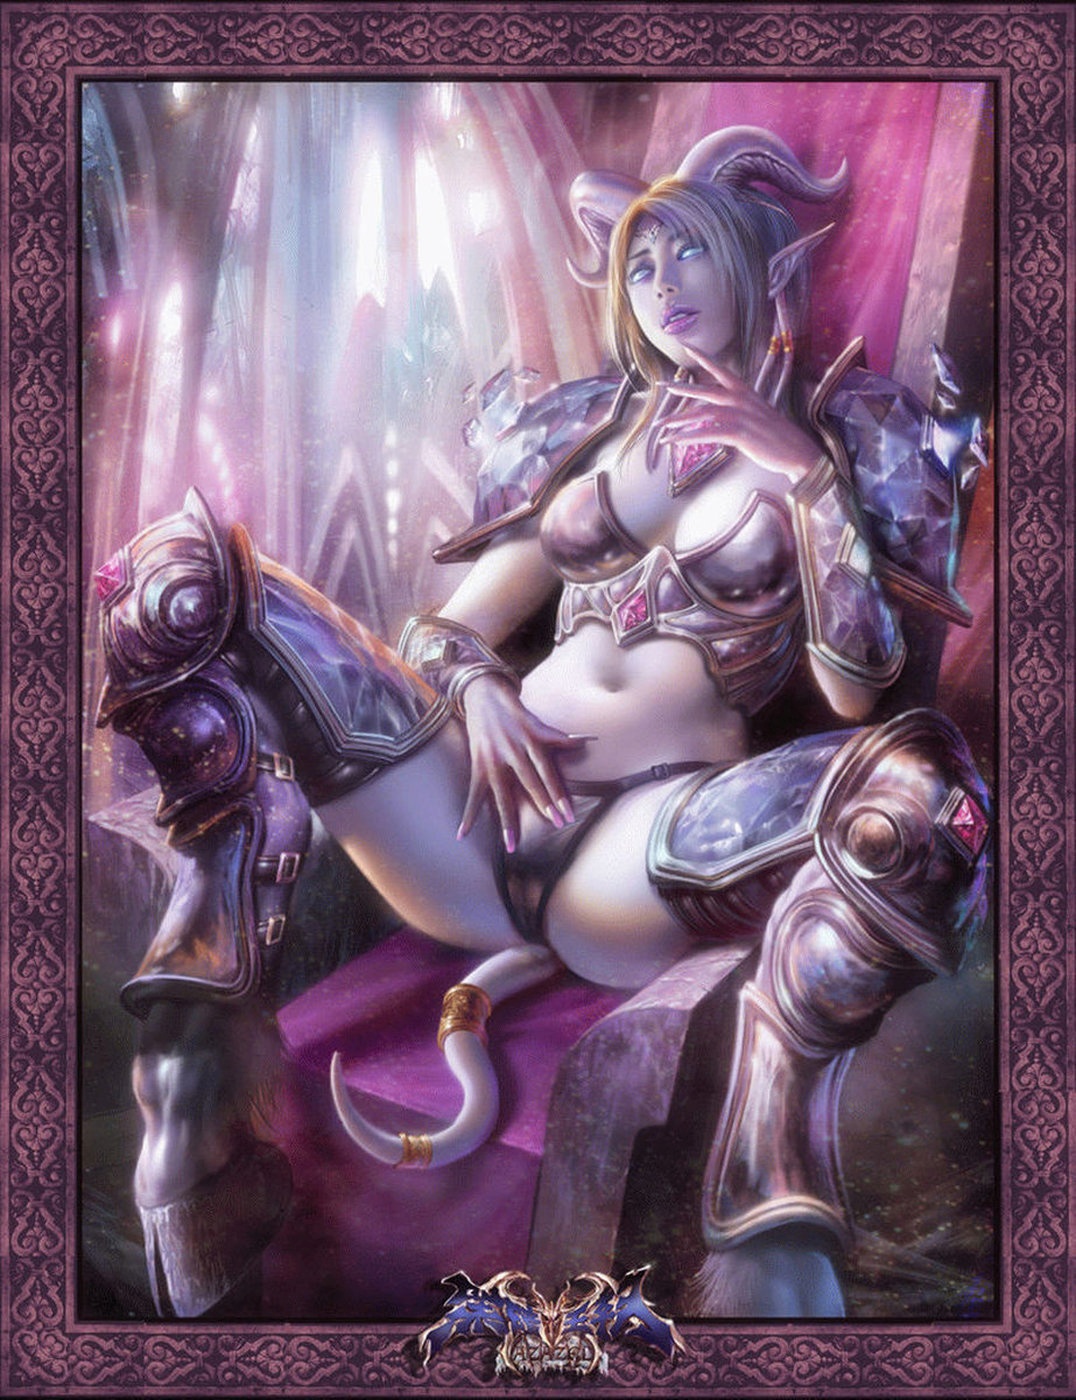 World Of Warcraft Draenei Porn - World of Warcraft Collection - Draenei - Page 5 - HentaiEra